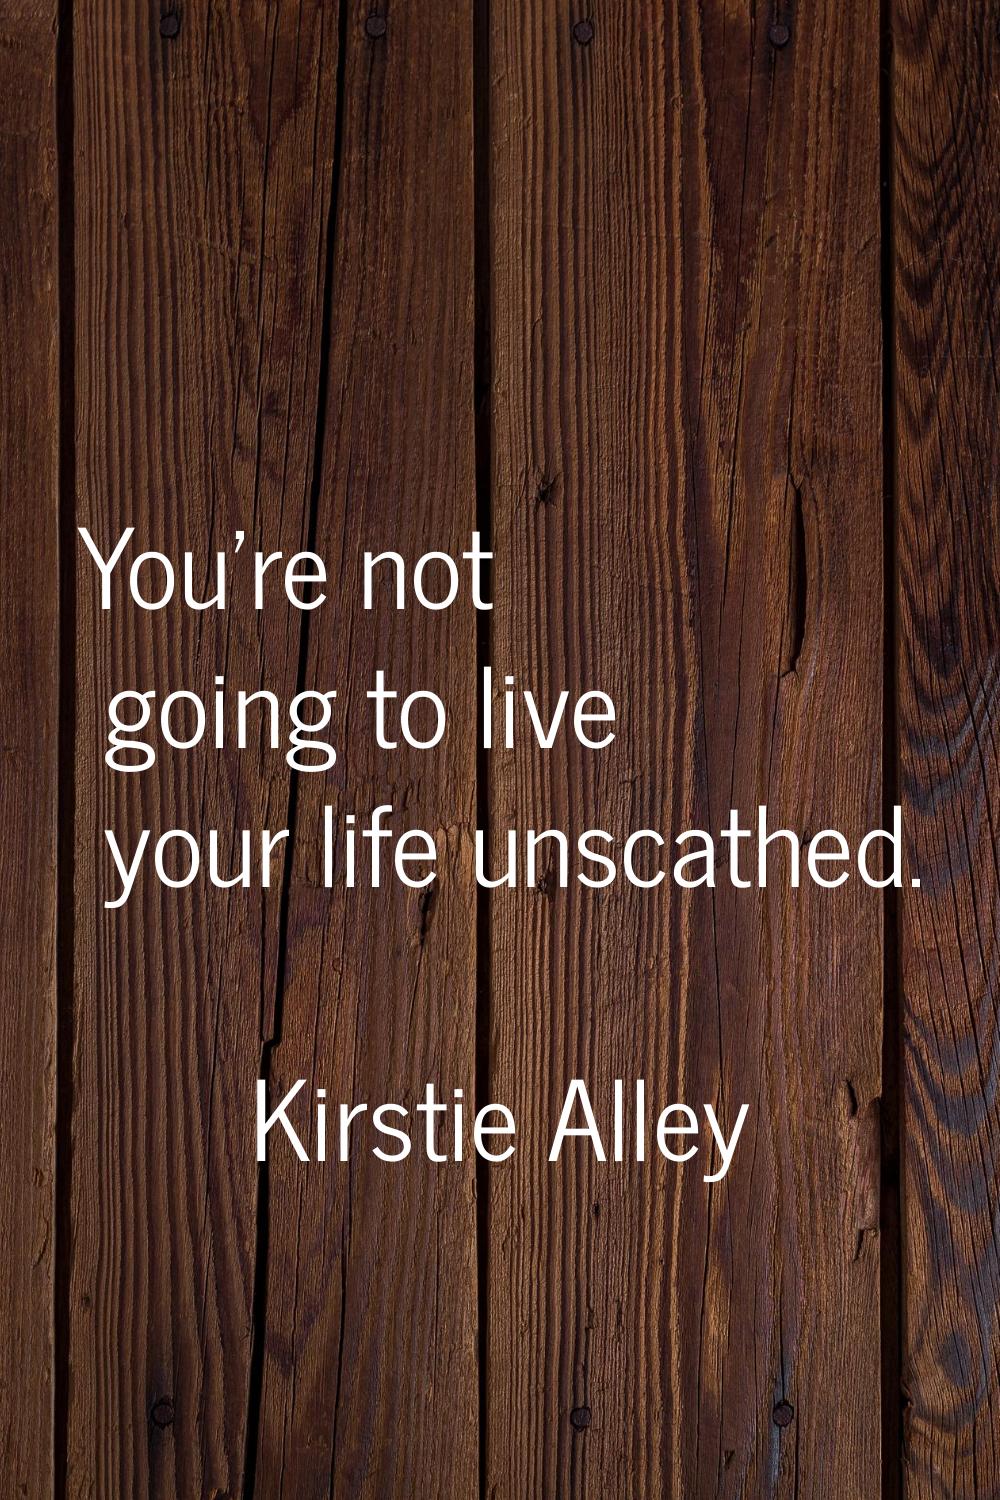 You're not going to live your life unscathed.